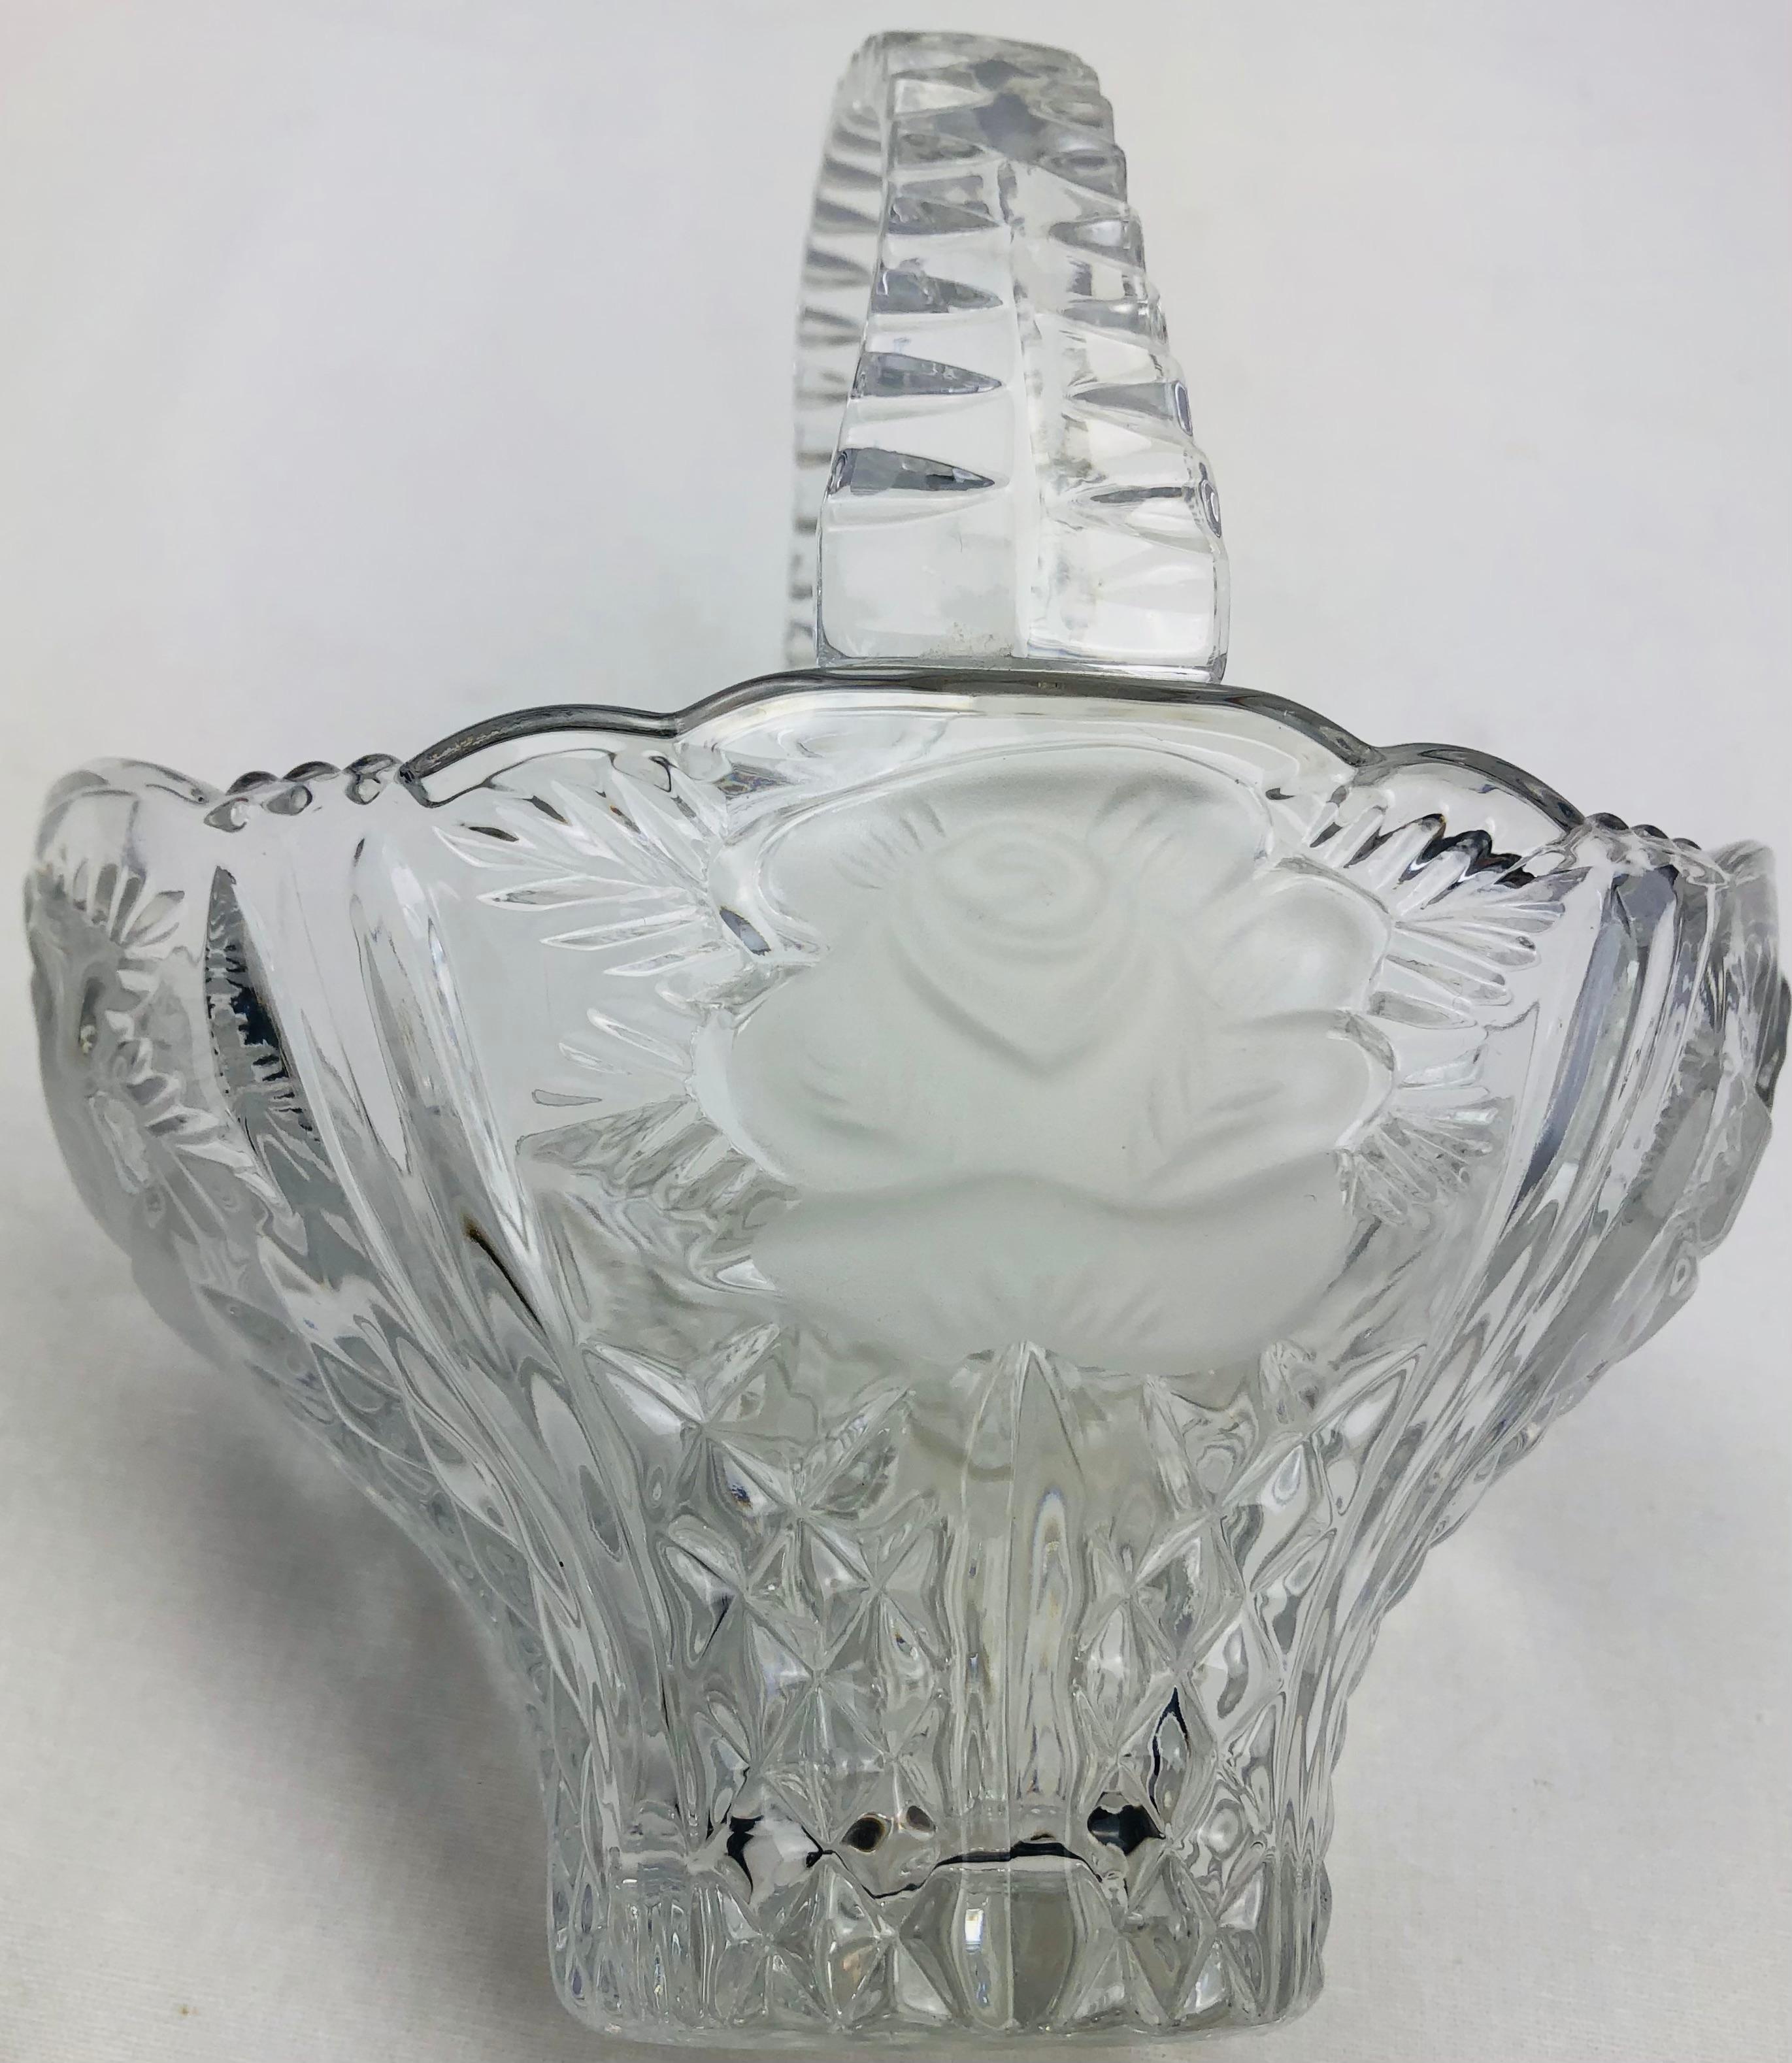 Lovely vintage French handled crystal bowl with frosted details attributed to Lalique. The frosted and heavily decorated edge offers a great contrast. 

Use this bowl for anything from candies to floating candles.

Measures: 6